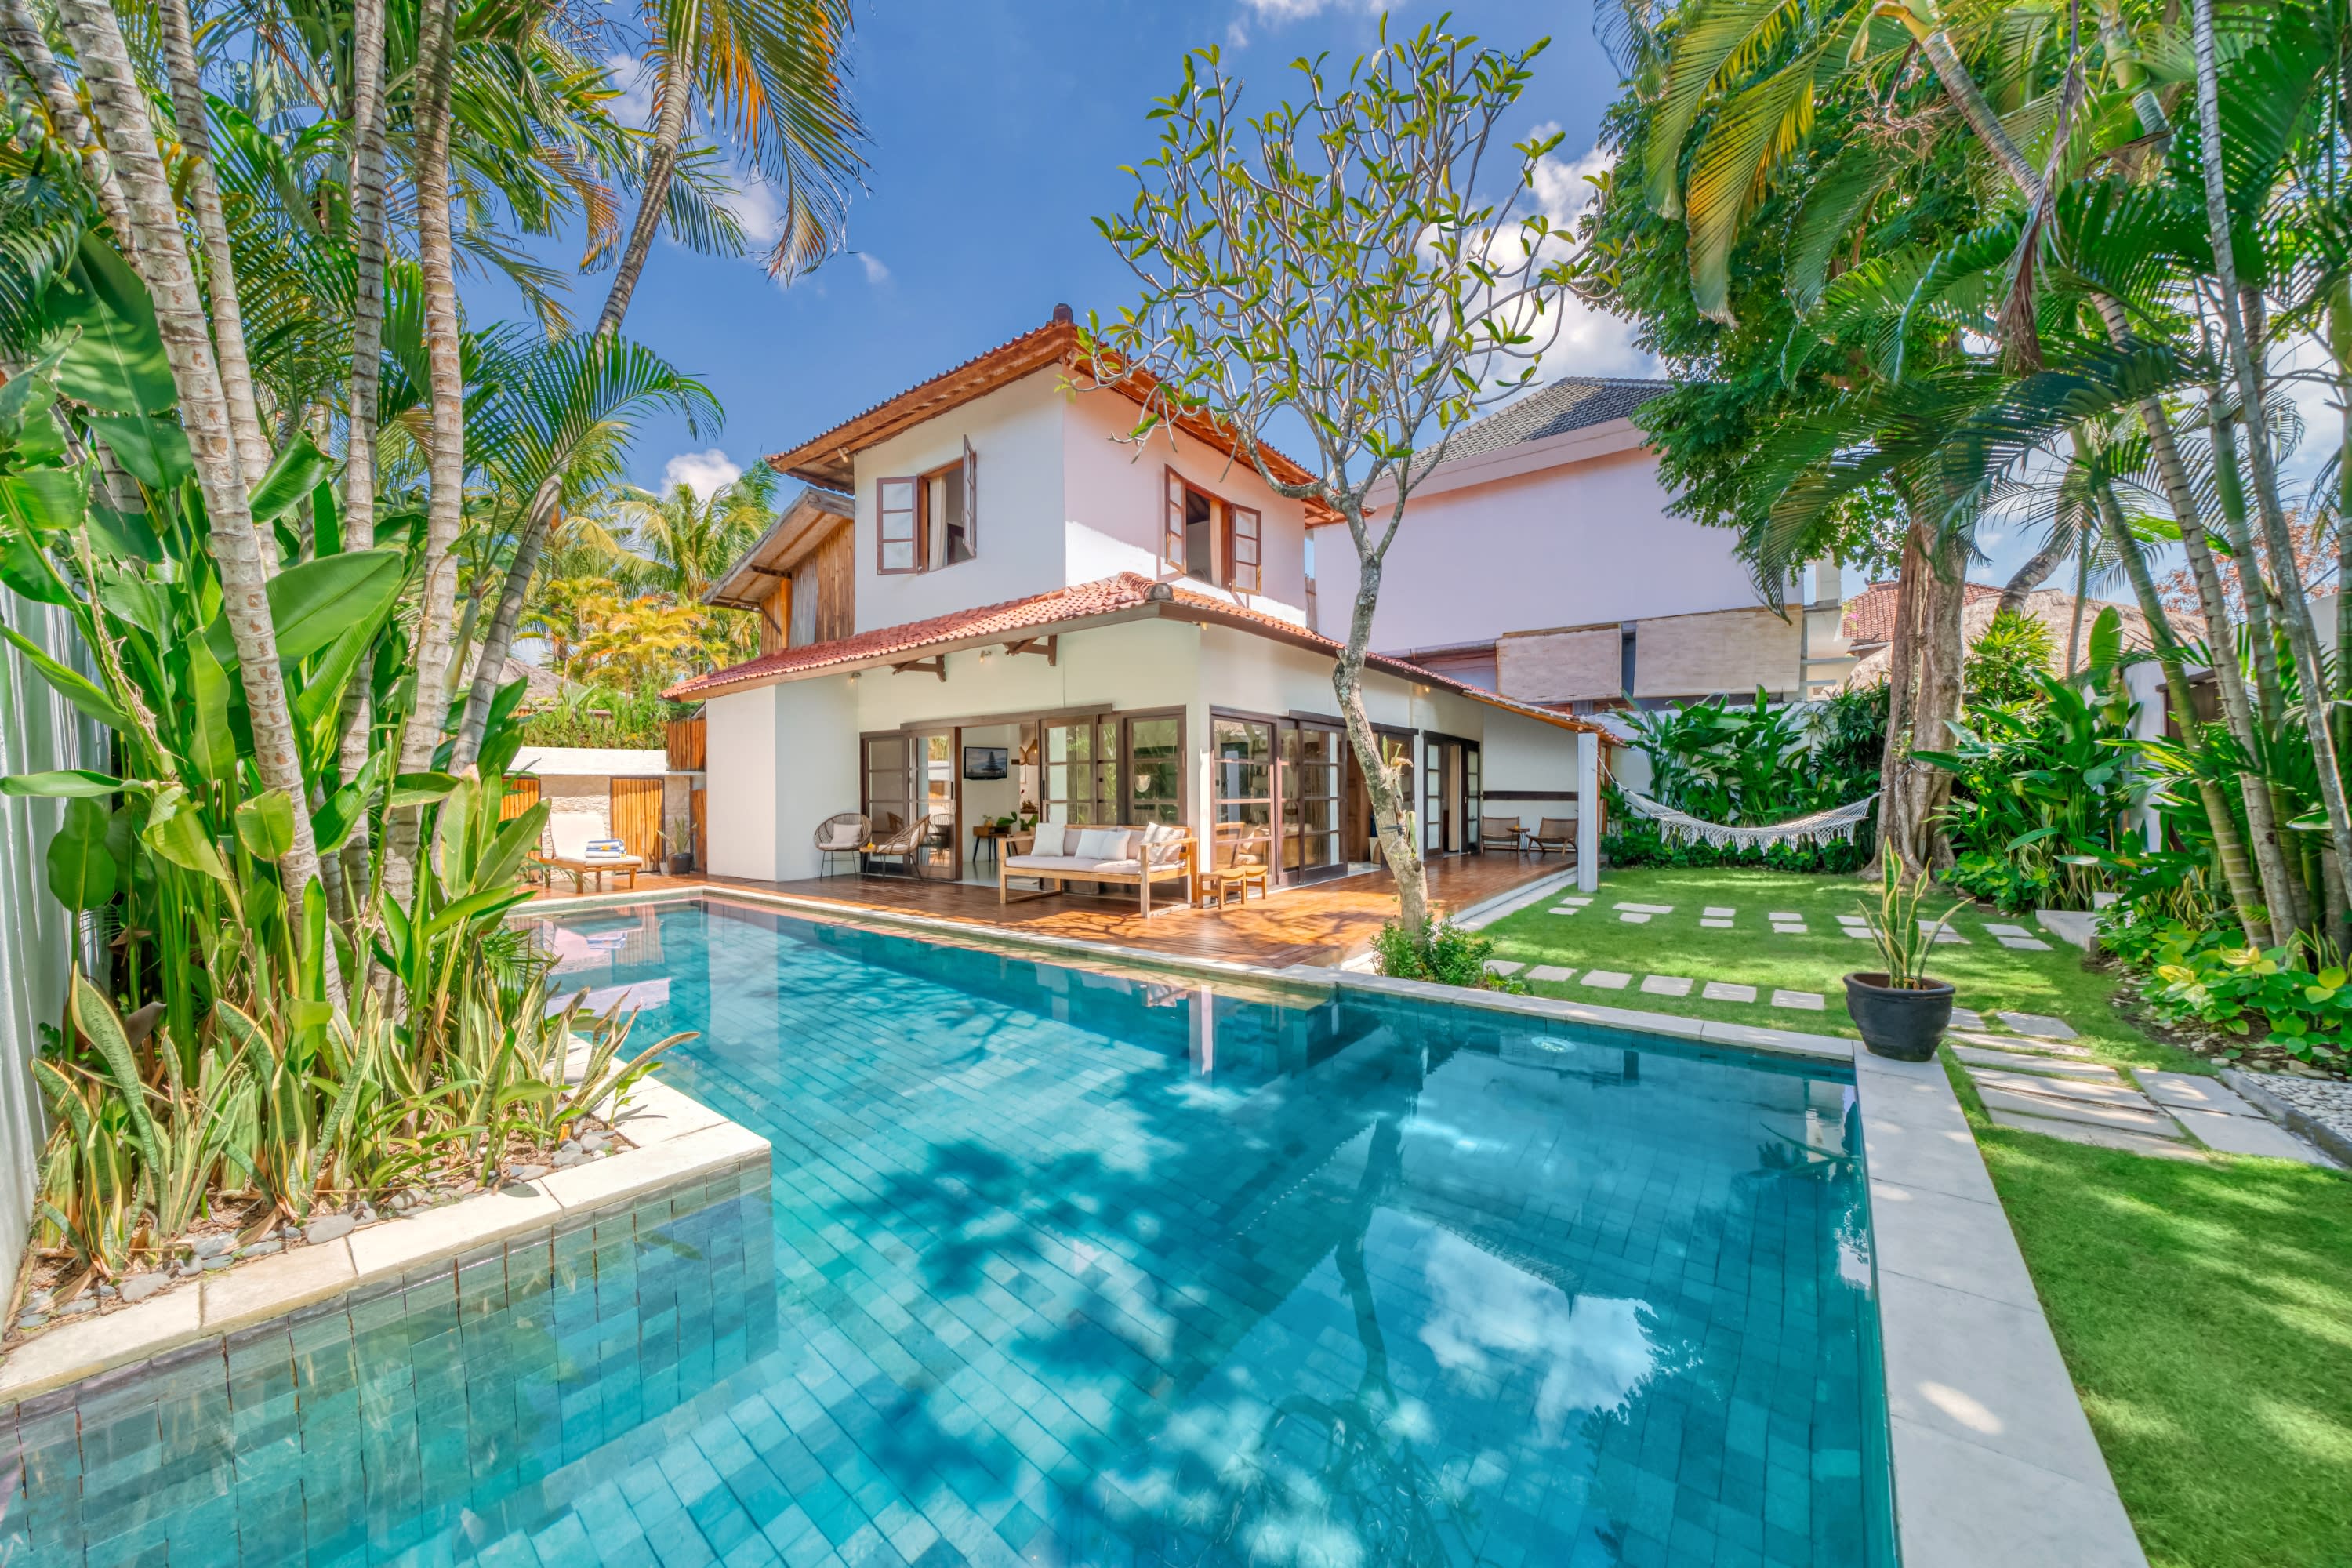 A family-friendly getaway with lush tropical gardens and private pool